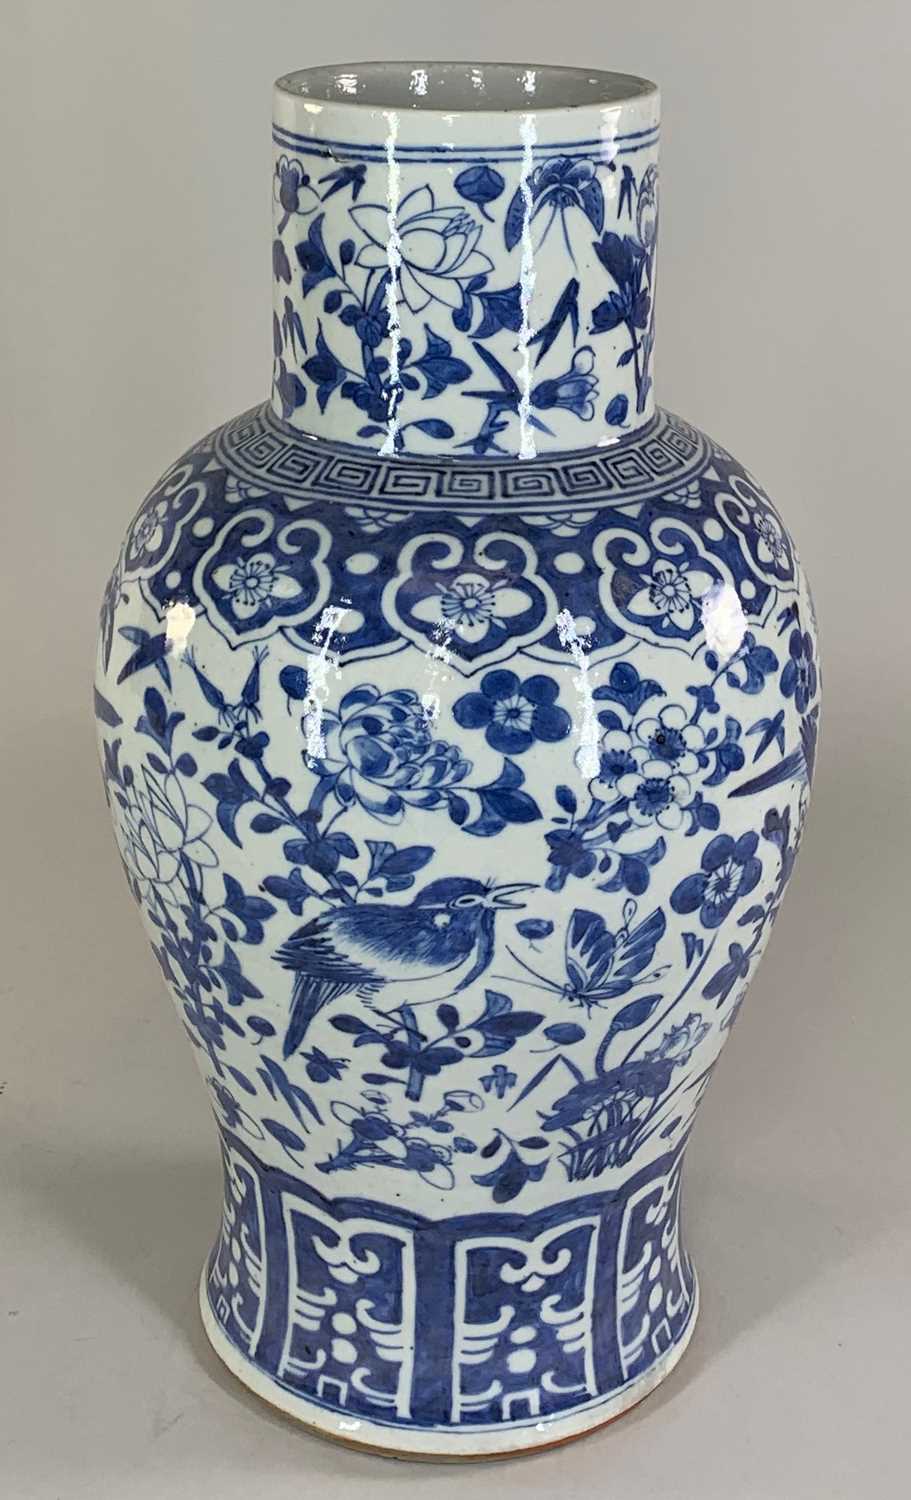 CHINESE BLUE & WHITE BALUSTER VASE, late Qing Dynasty, painted with flowers, insects and birds, - Image 5 of 12